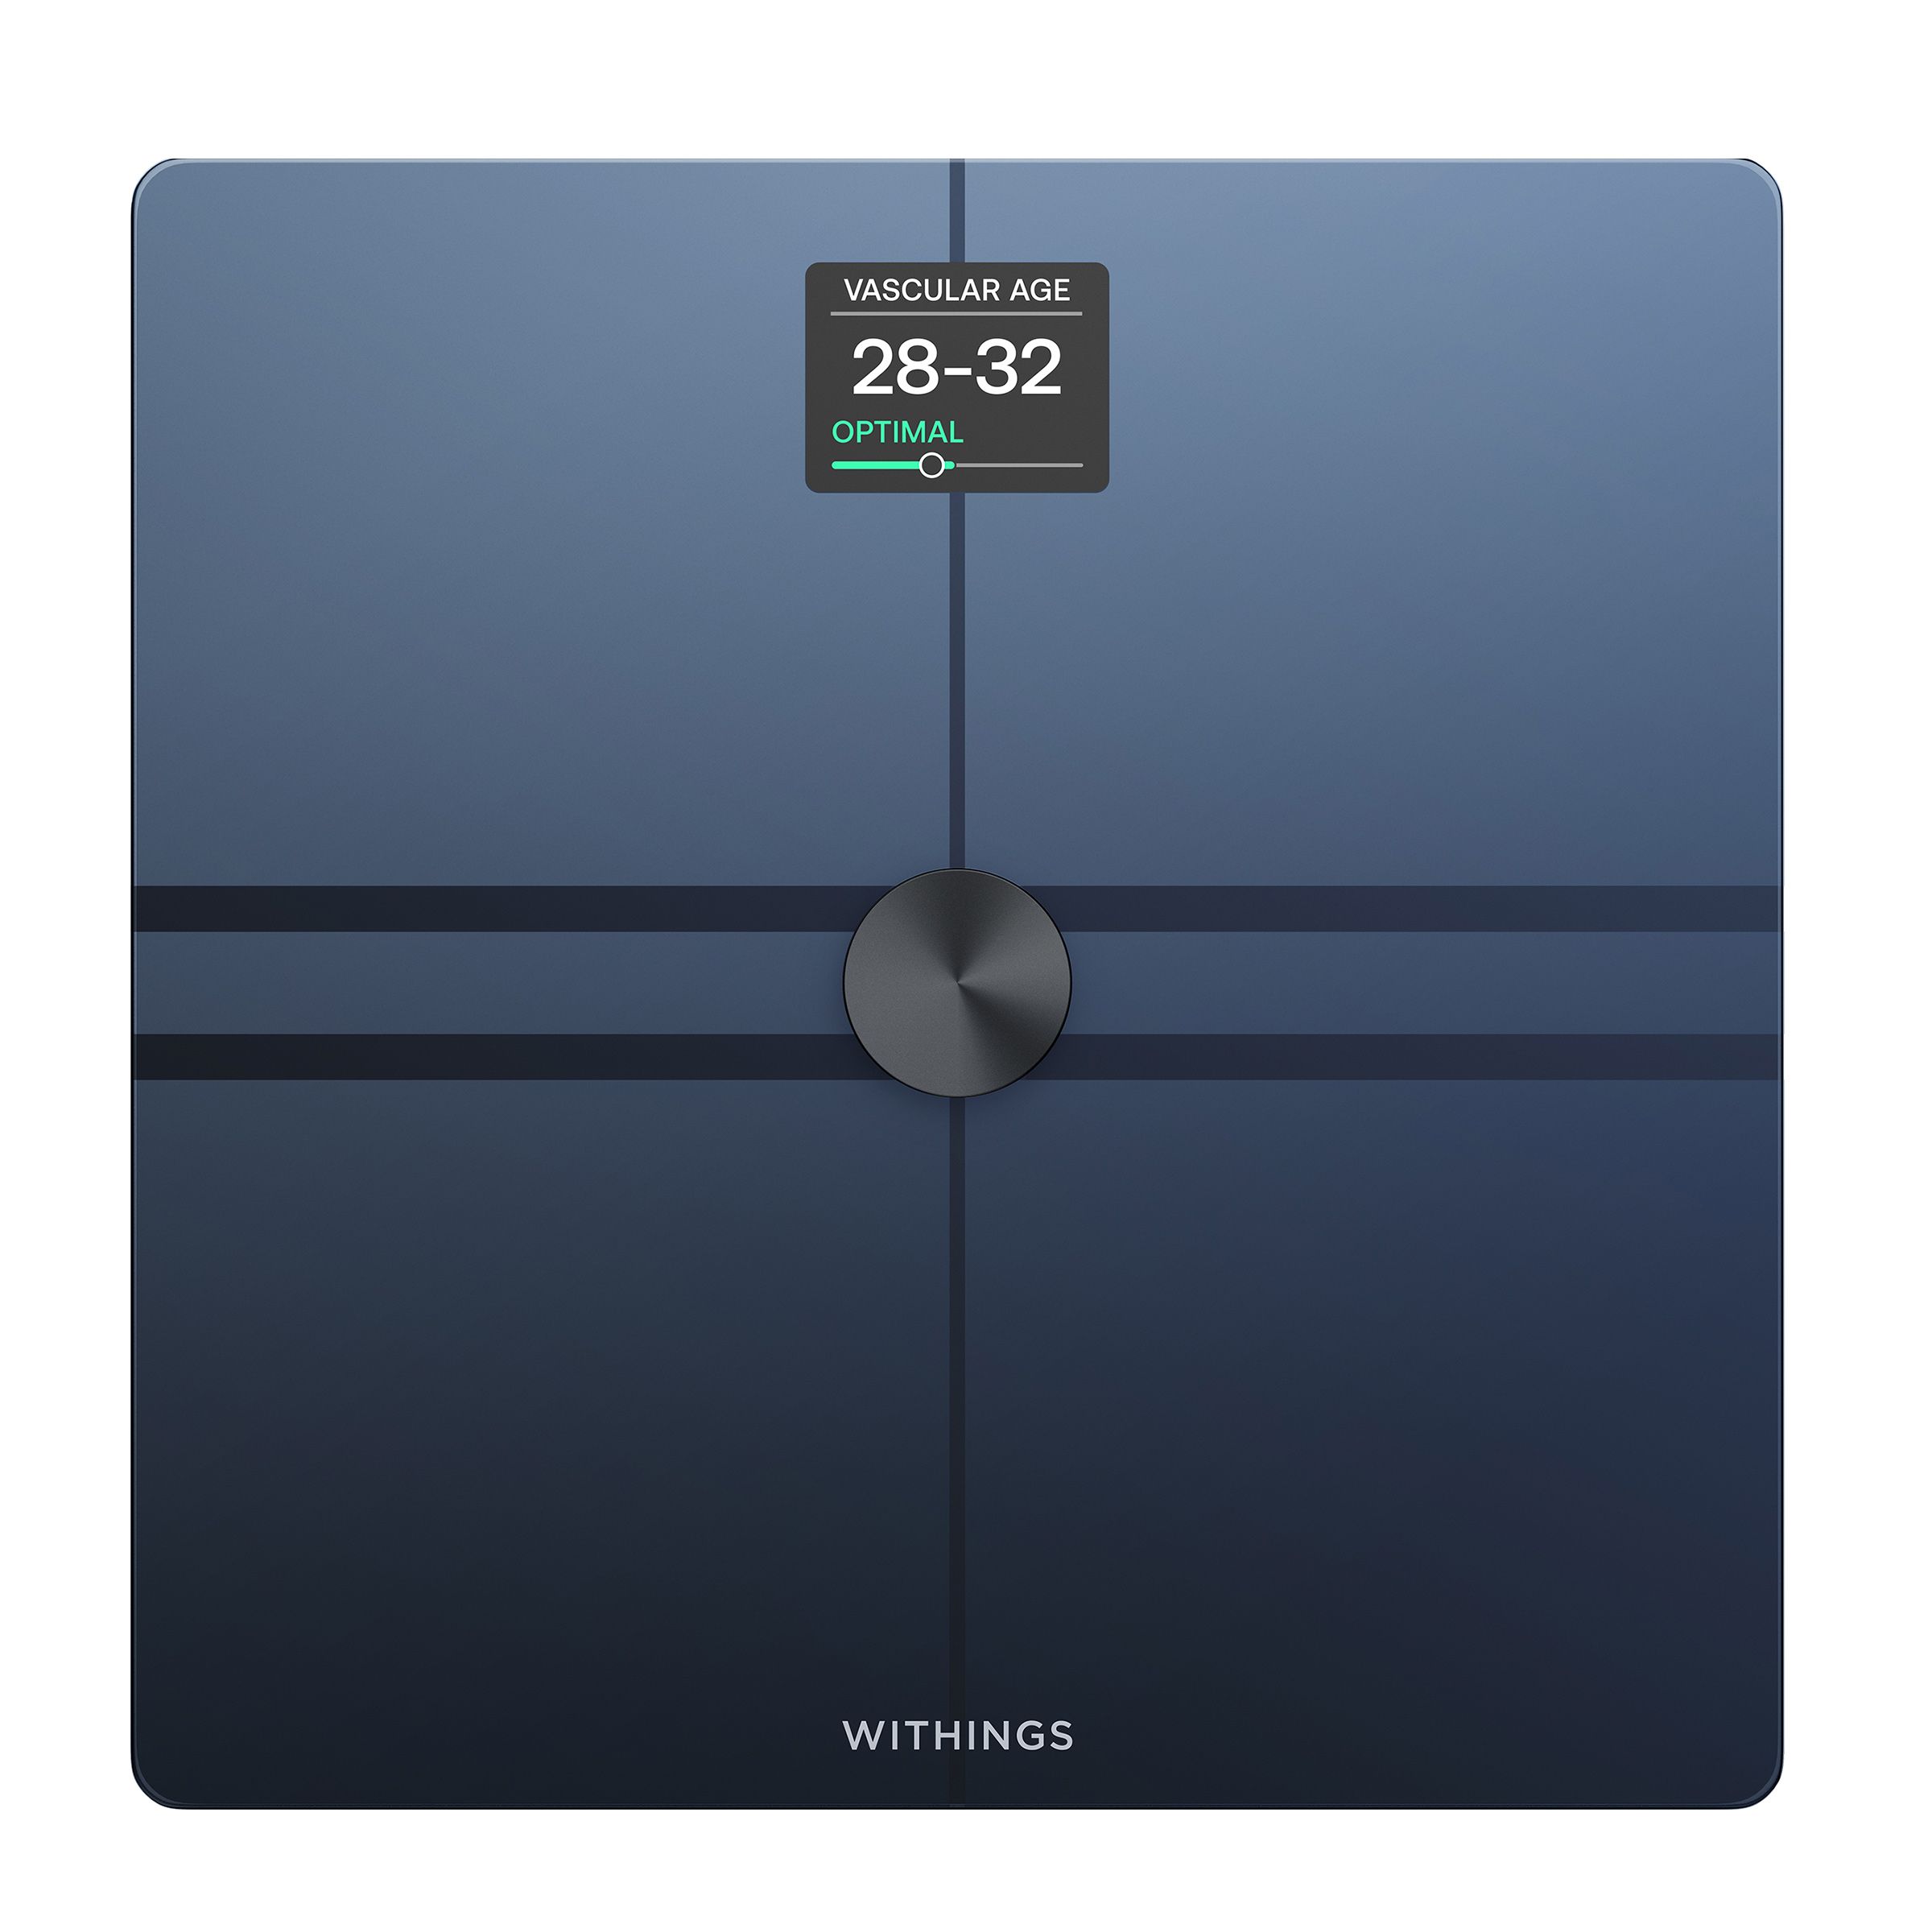 Withings Complete Body Composition Analysis Wi-Fi Smart Scale with LCD Color Screen - Black